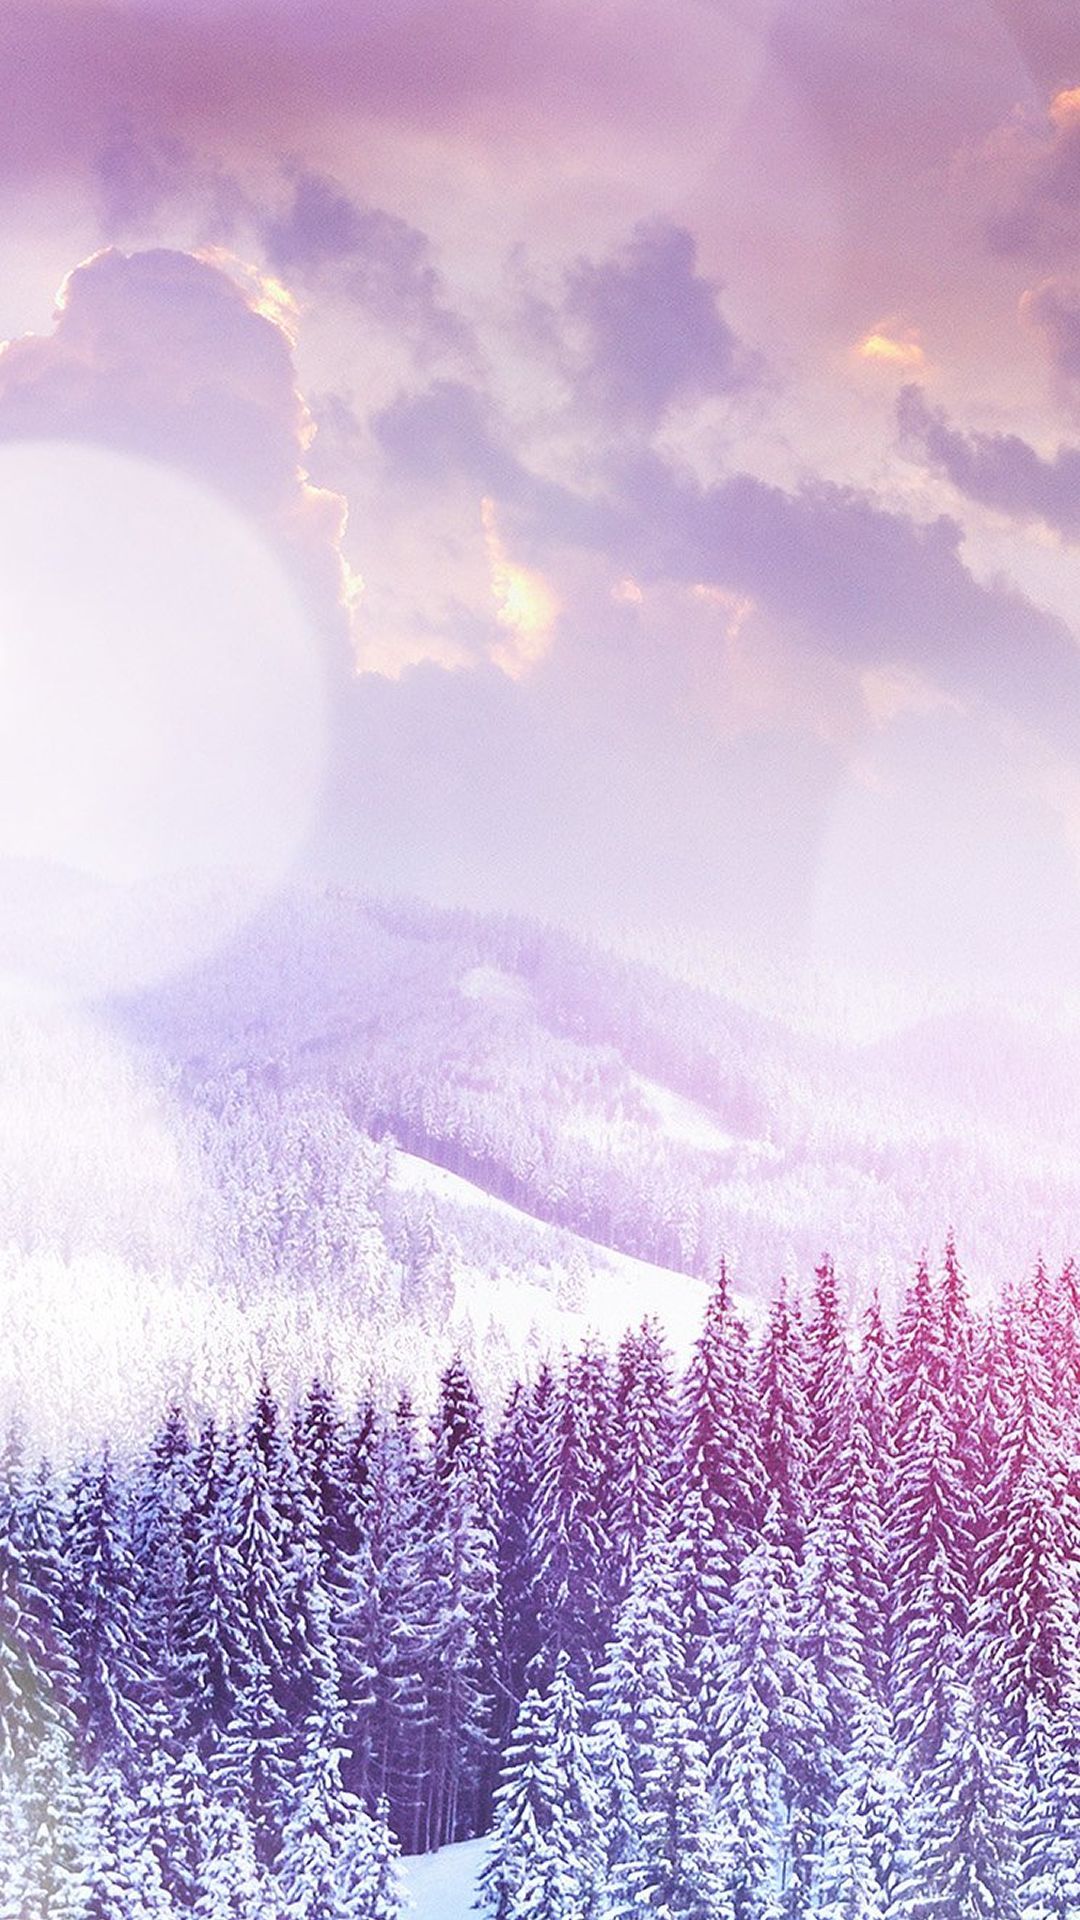 Winter Flare White Snowy Mountains Landscape iPhone 6 Wallpaper Download. iPhone Wallpaper, iPad. iPhone wallpaper winter, Winter wallpaper, iPhone 5s wallpaper